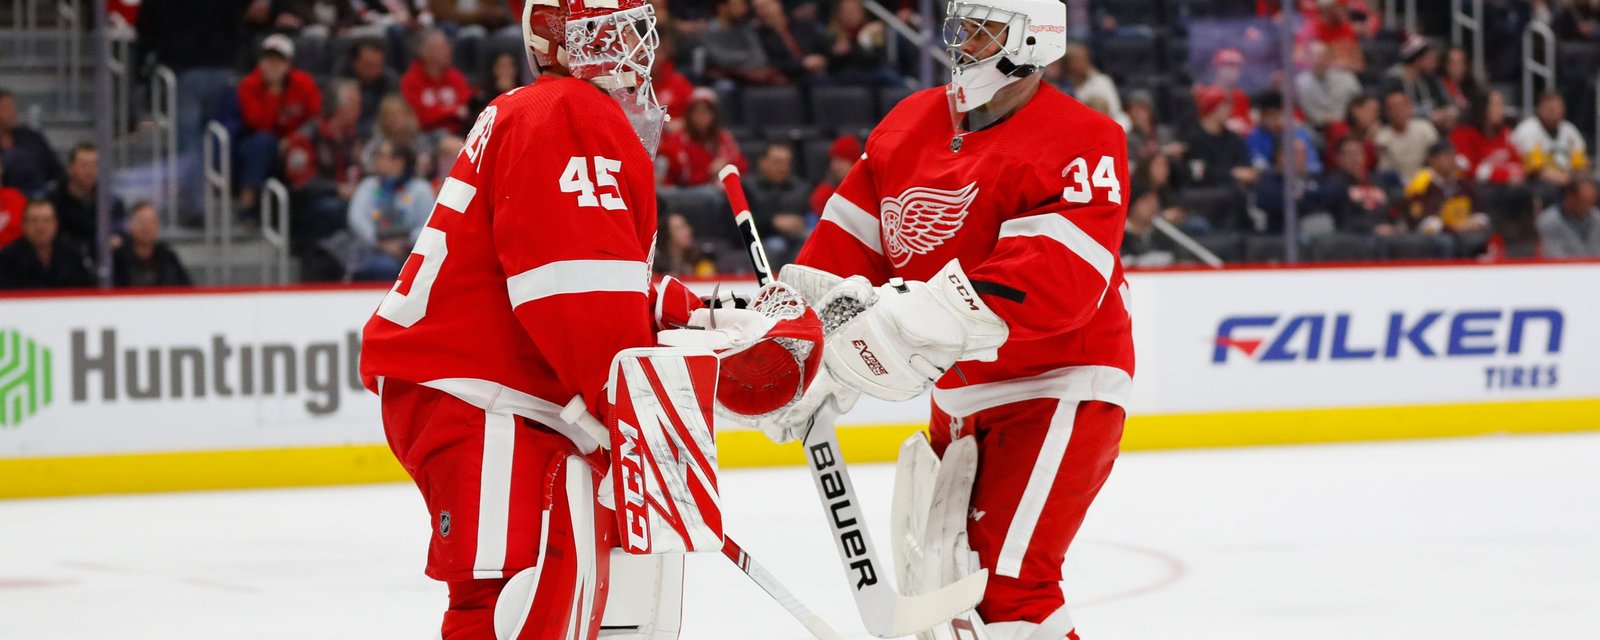 Comrie makes controversial statement about his jersey number ahead of first Wings start 